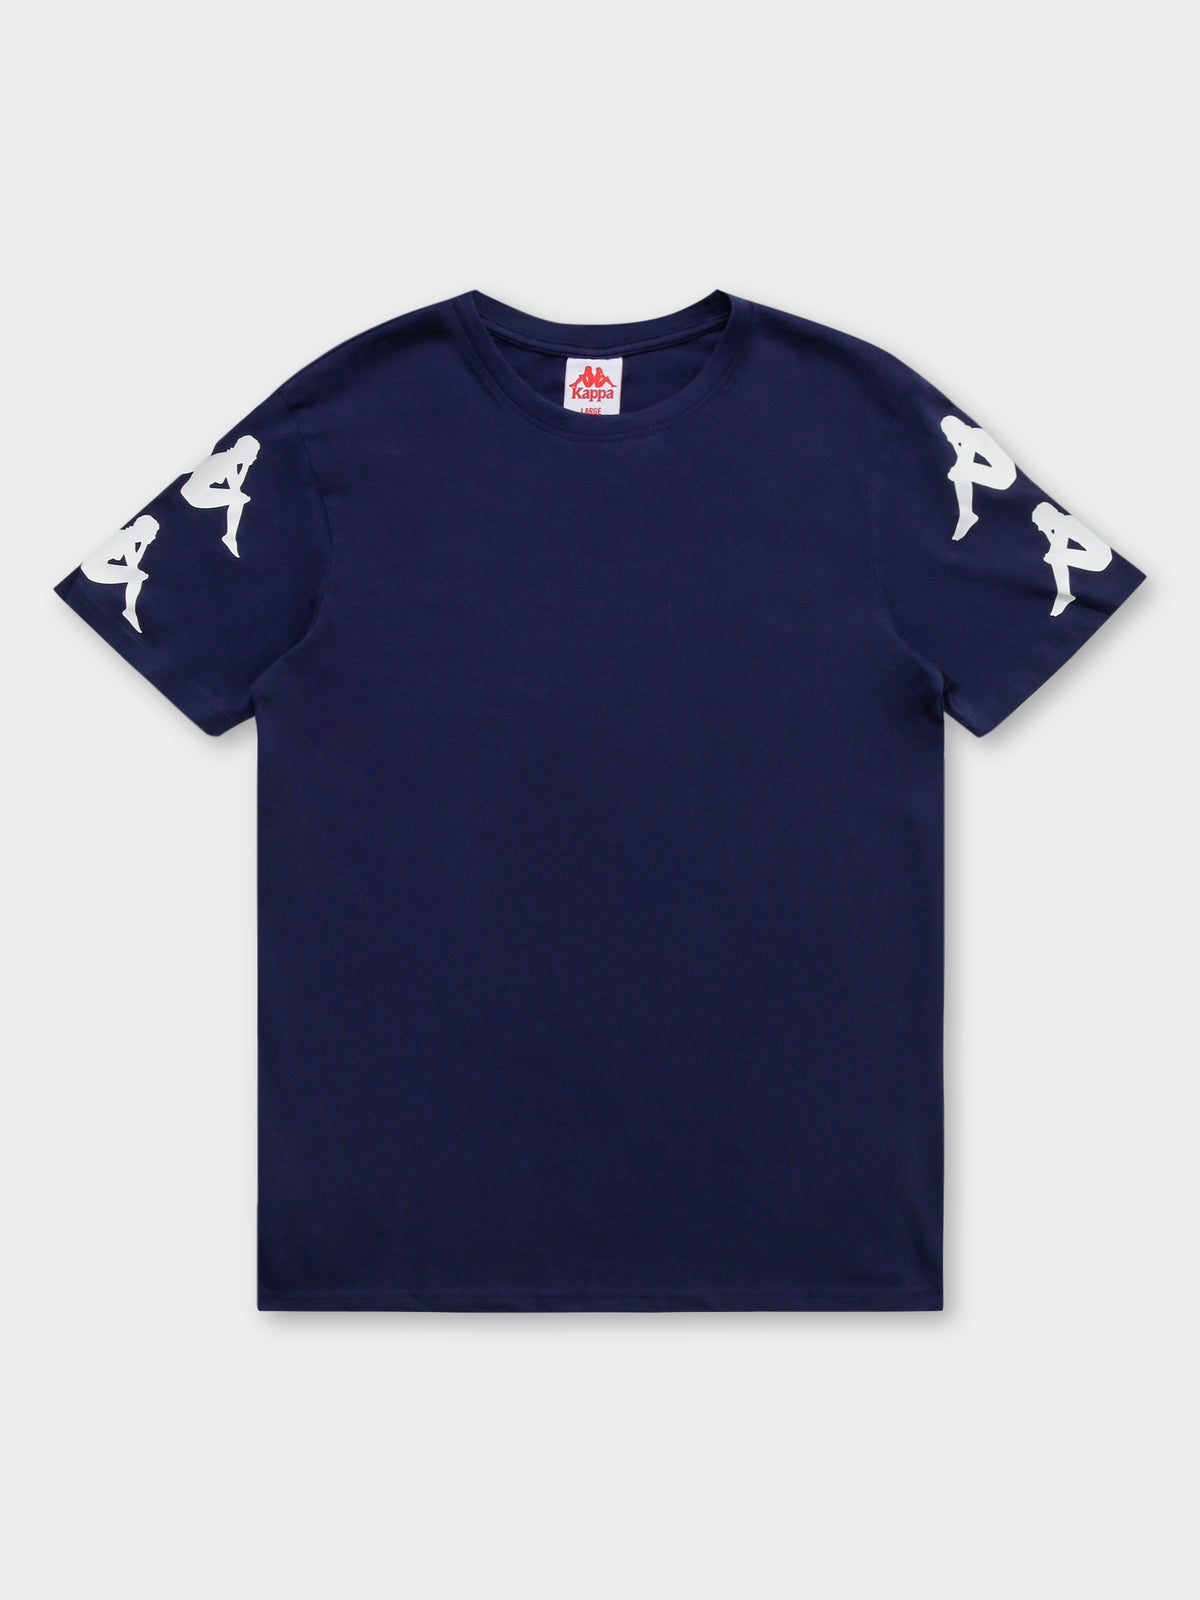 Authentic Reser T-Shirt in Navy